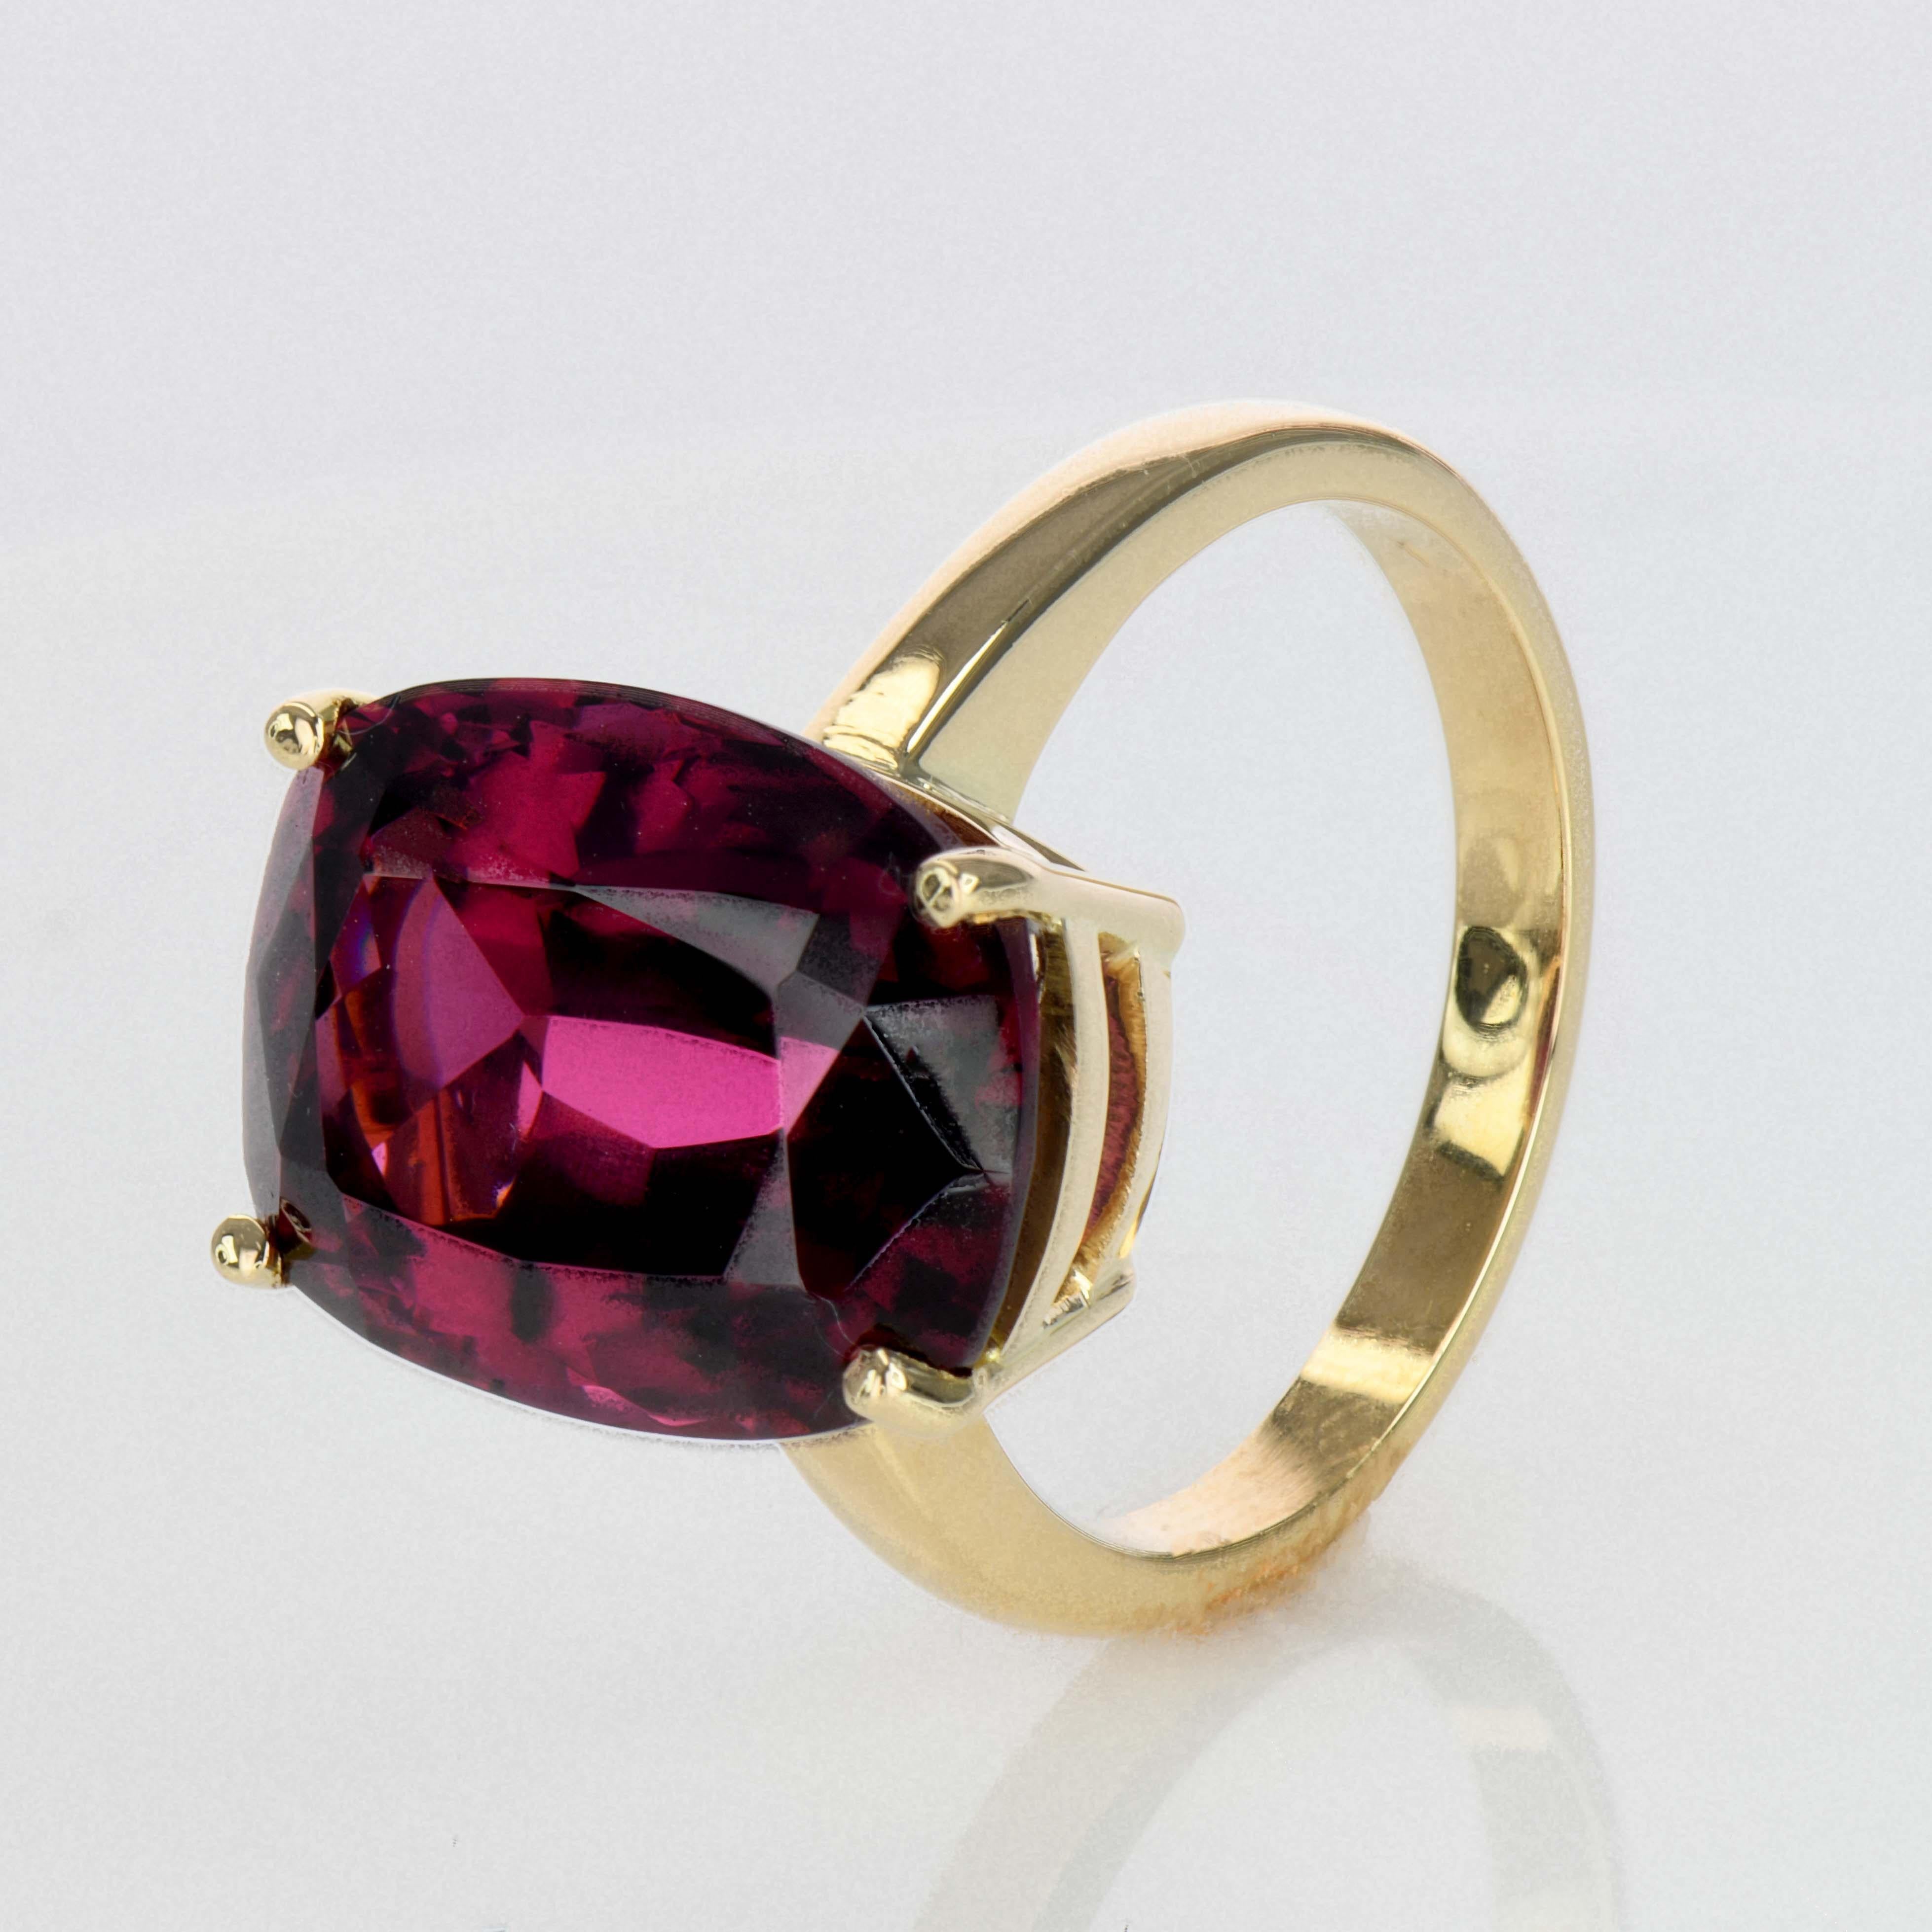 10.66ct Rhodolite Solitaire Ring-Cushion Cut-18KT Yellow Gold-GIA Certified